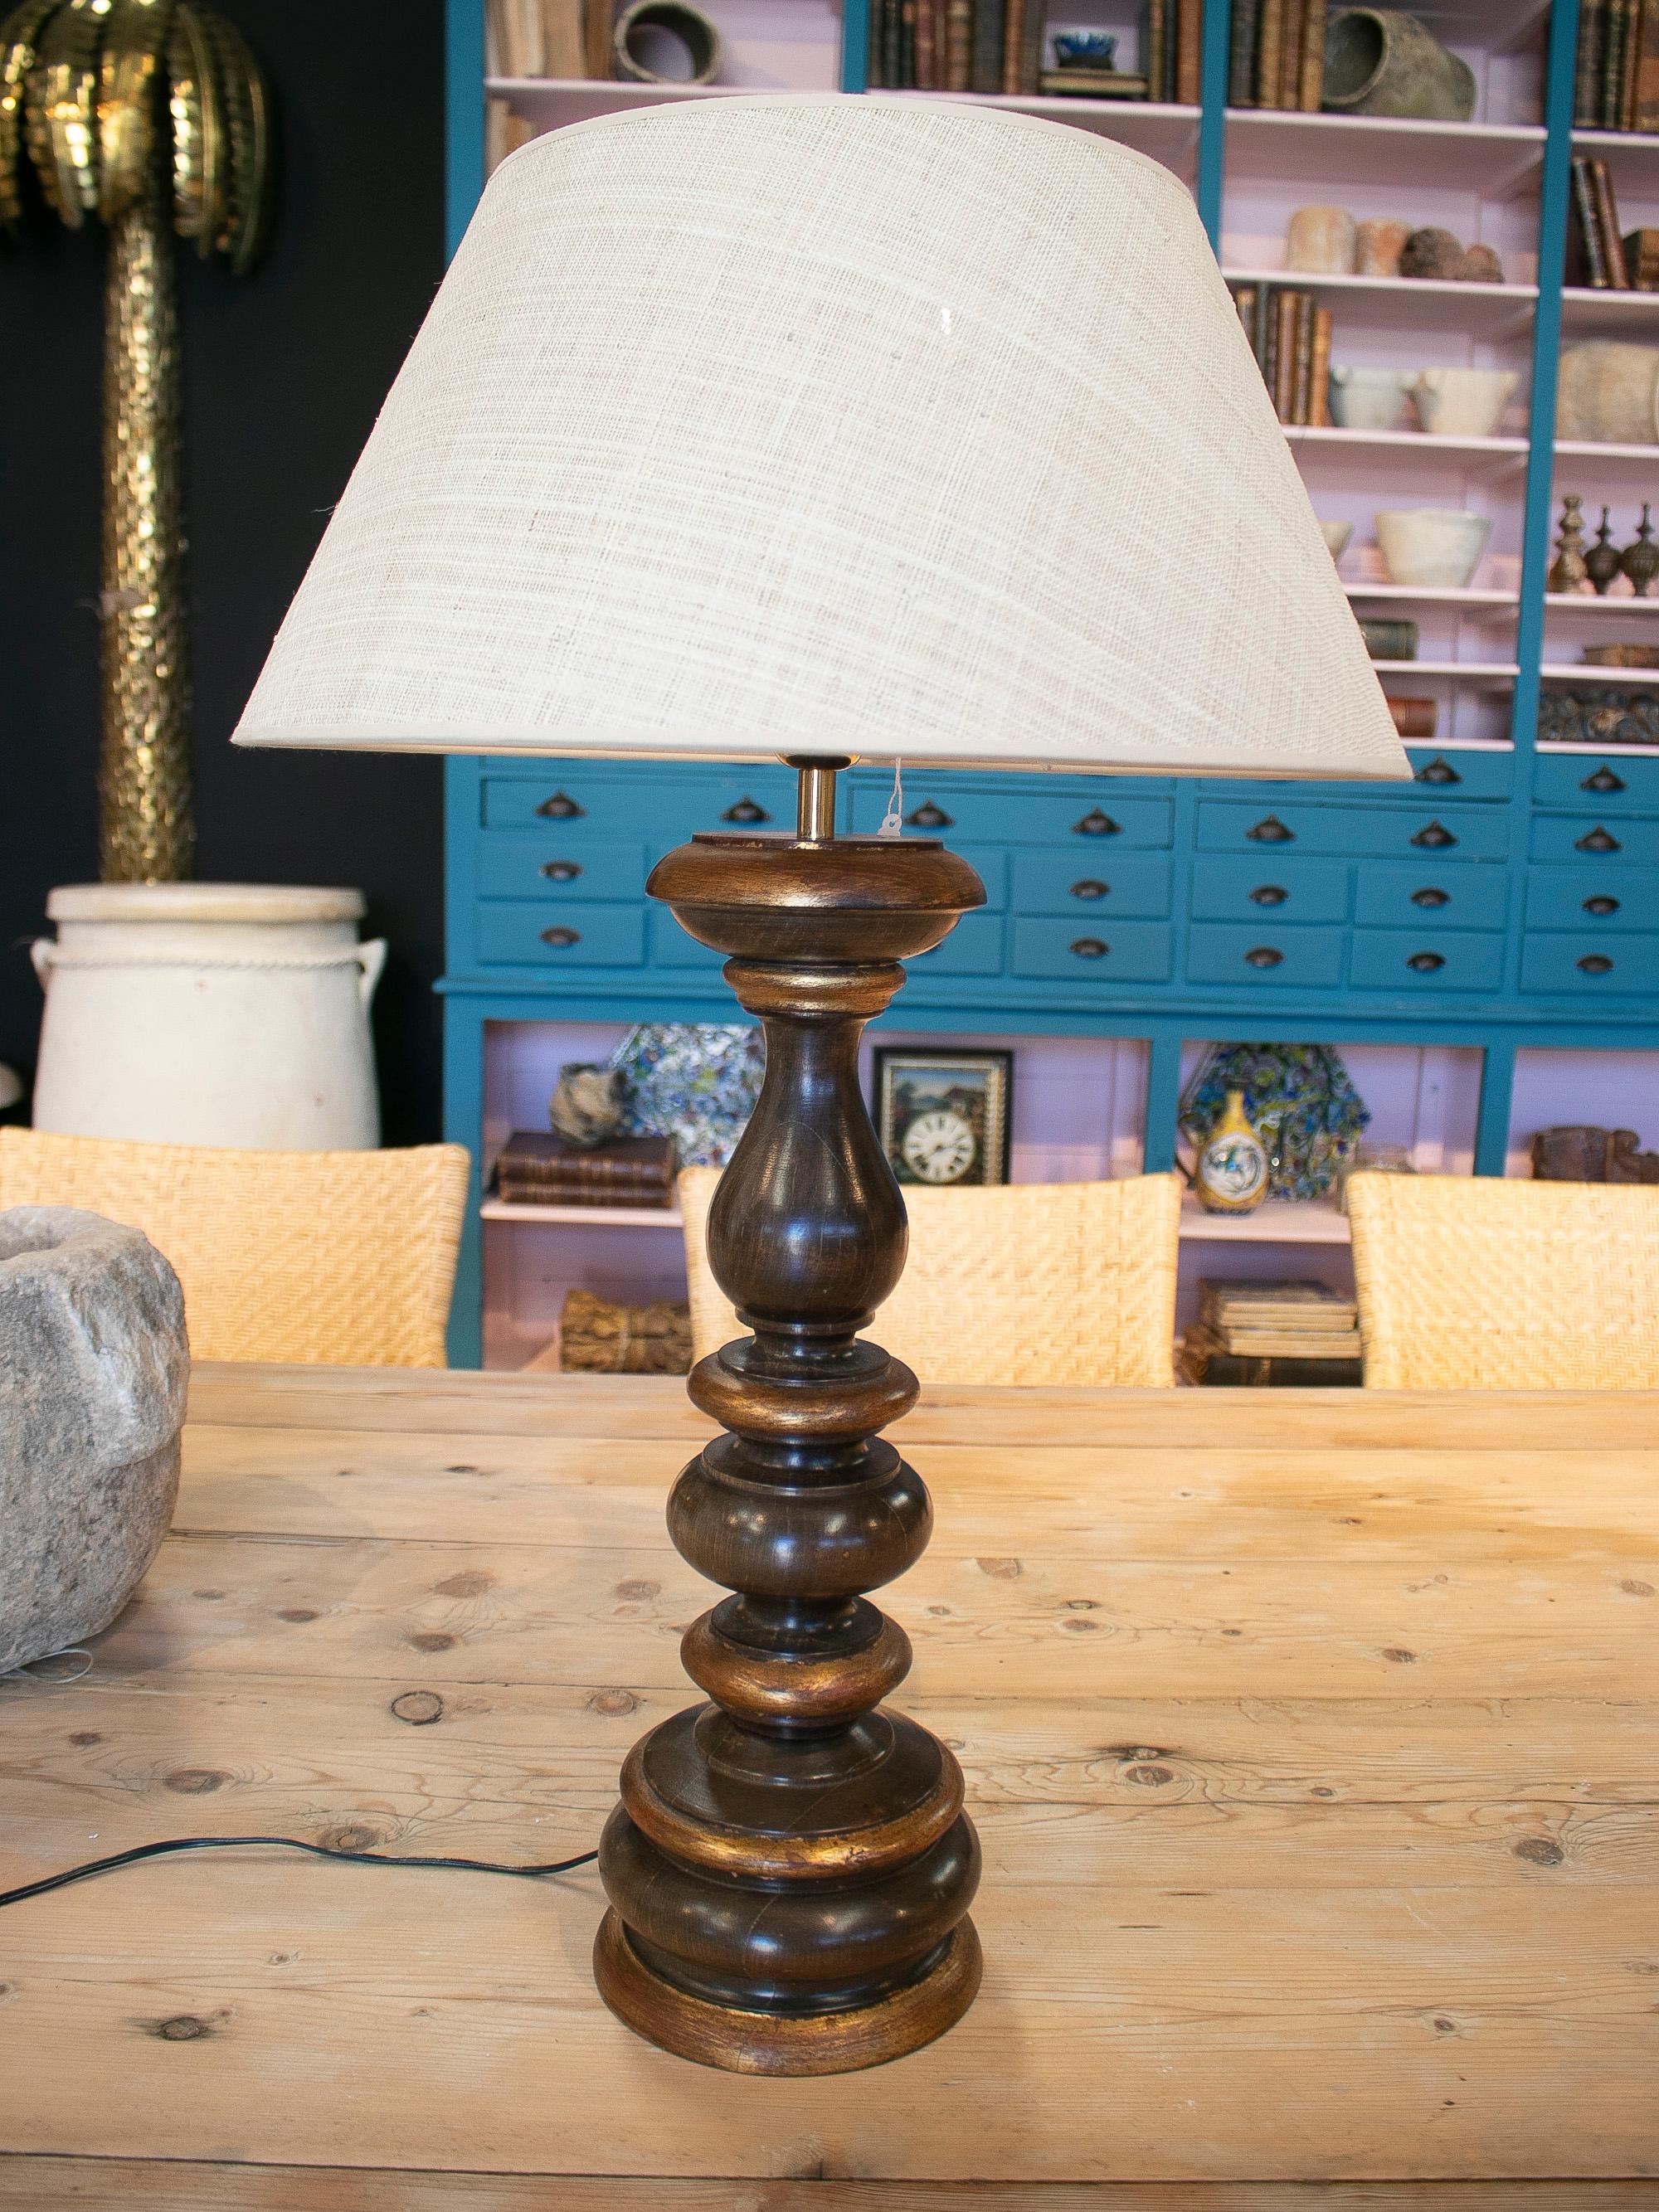 Vintage pair of 1990s Spanish wooden spindle table lamps. Lampshade not included.

Dimensions with lampshades: 75 x 44cm.